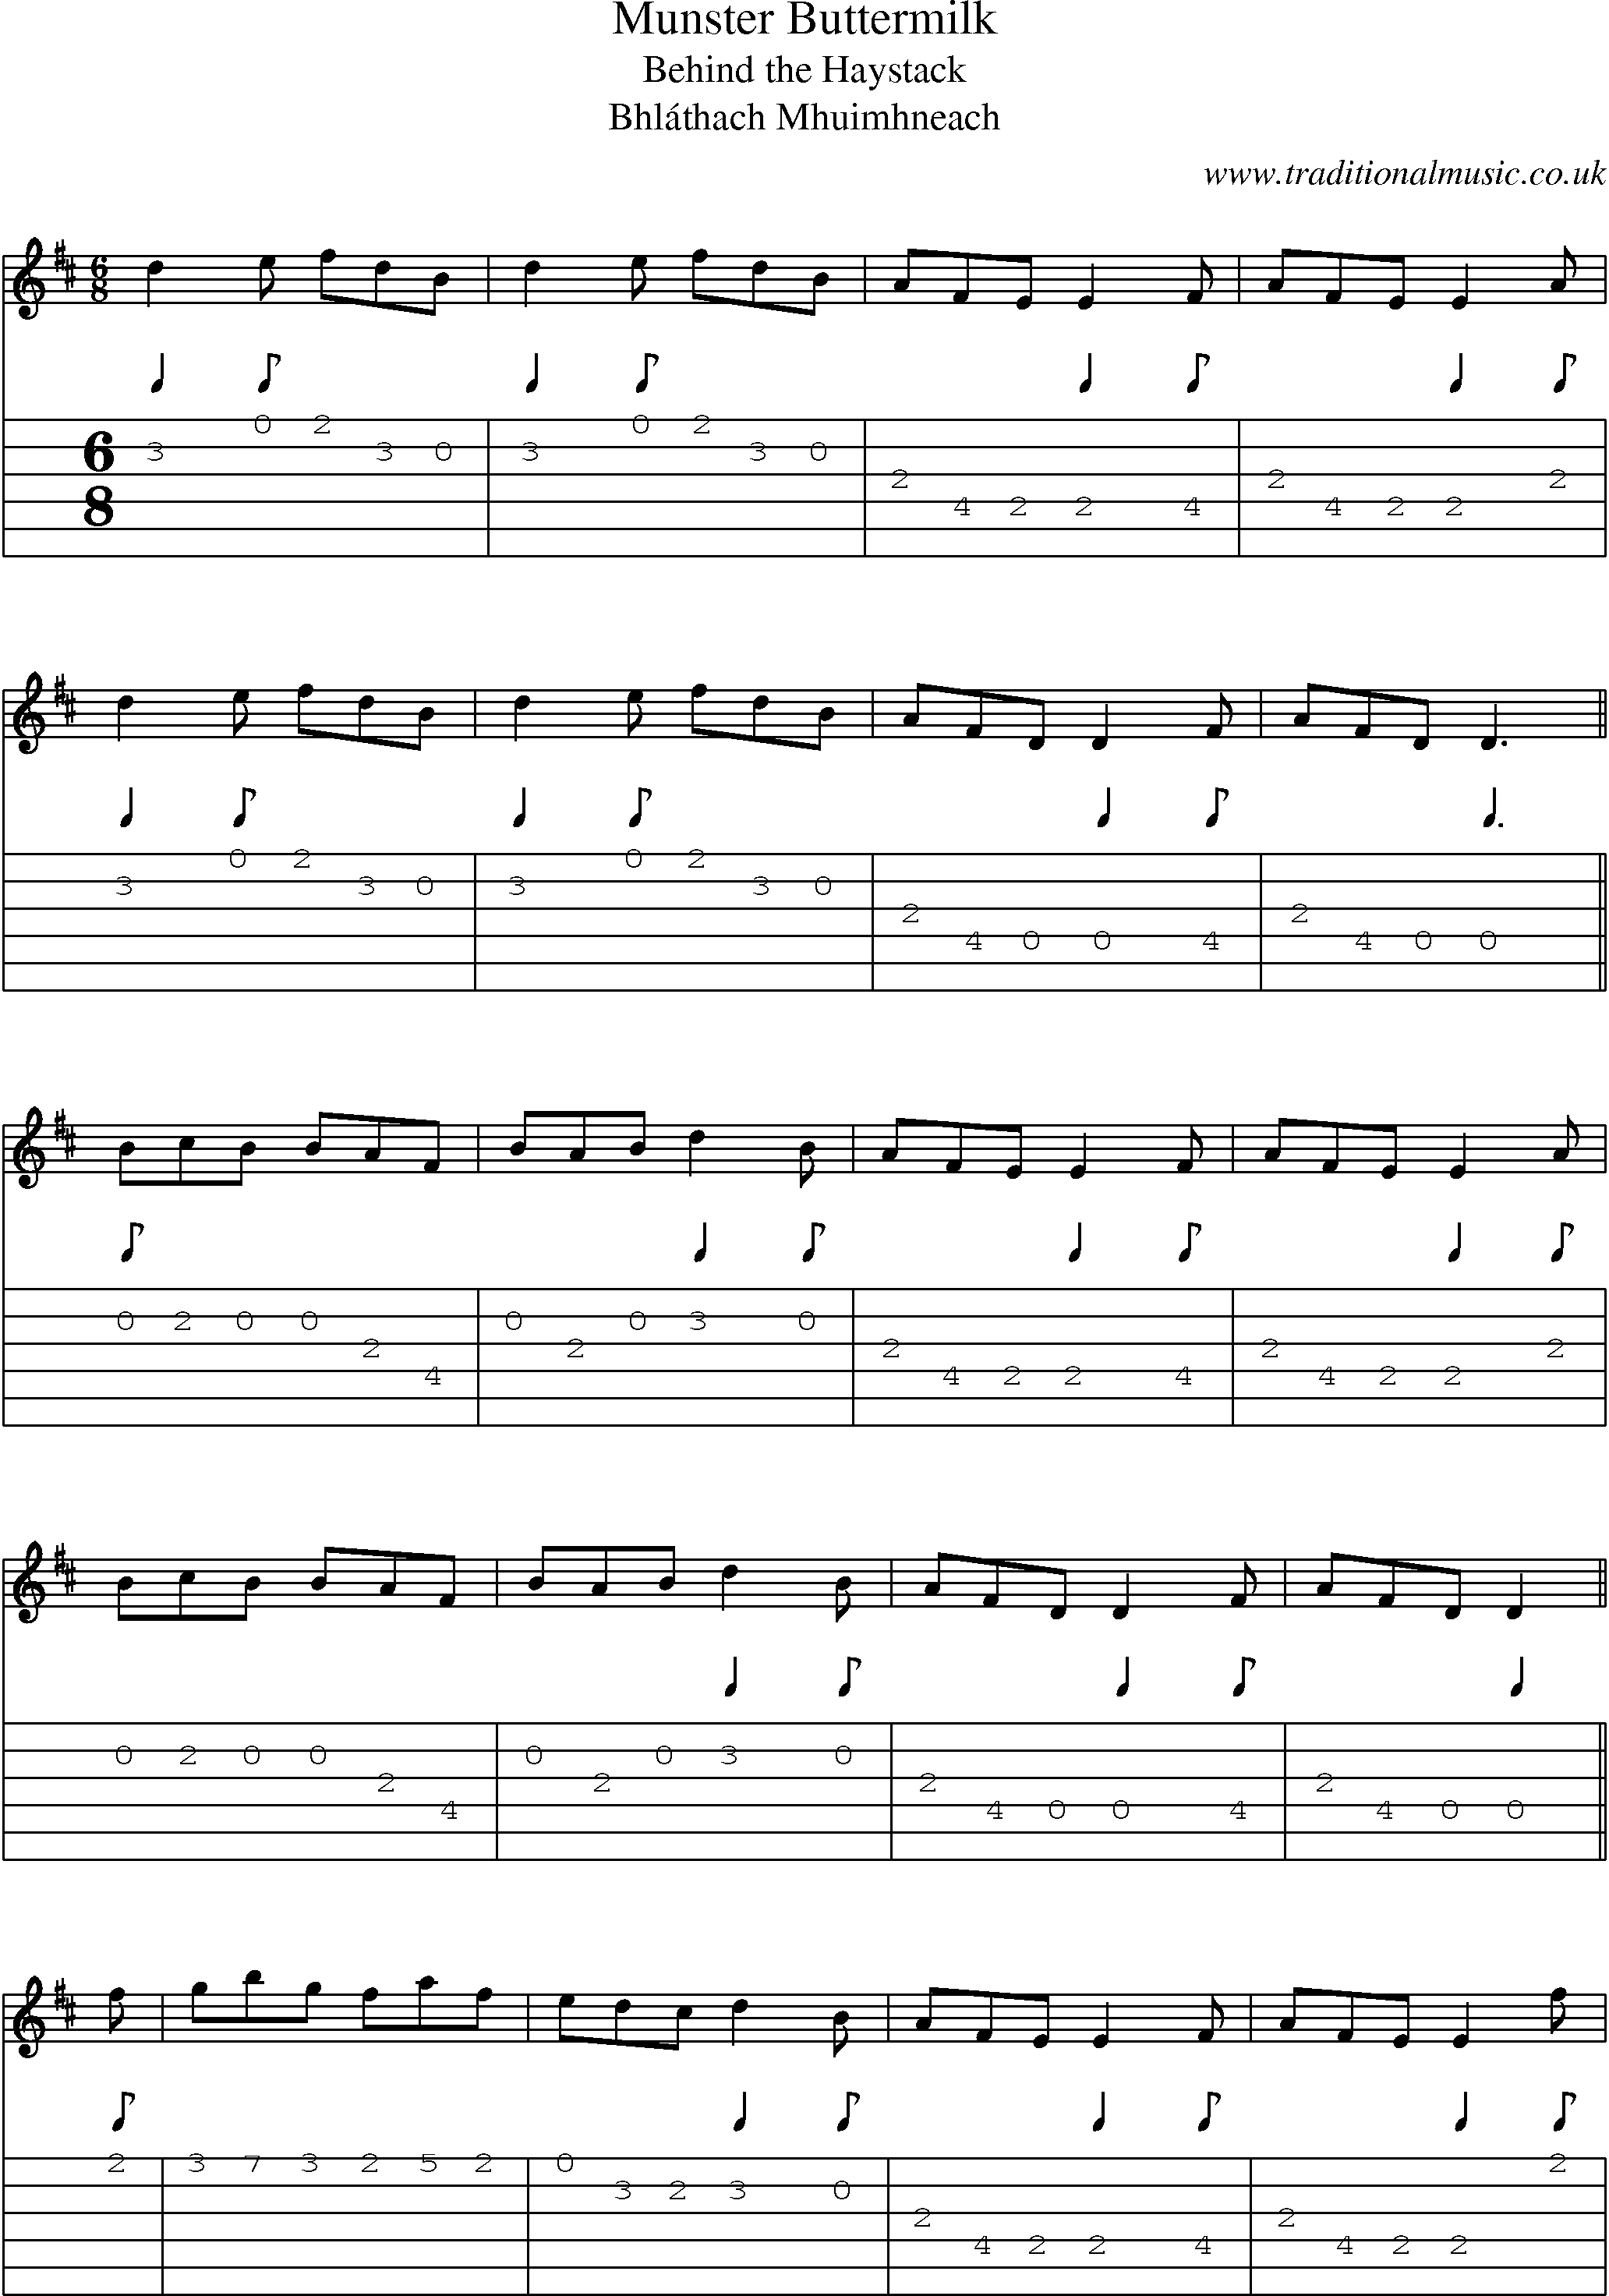 Music Score and Guitar Tabs for Munster Buttermilk